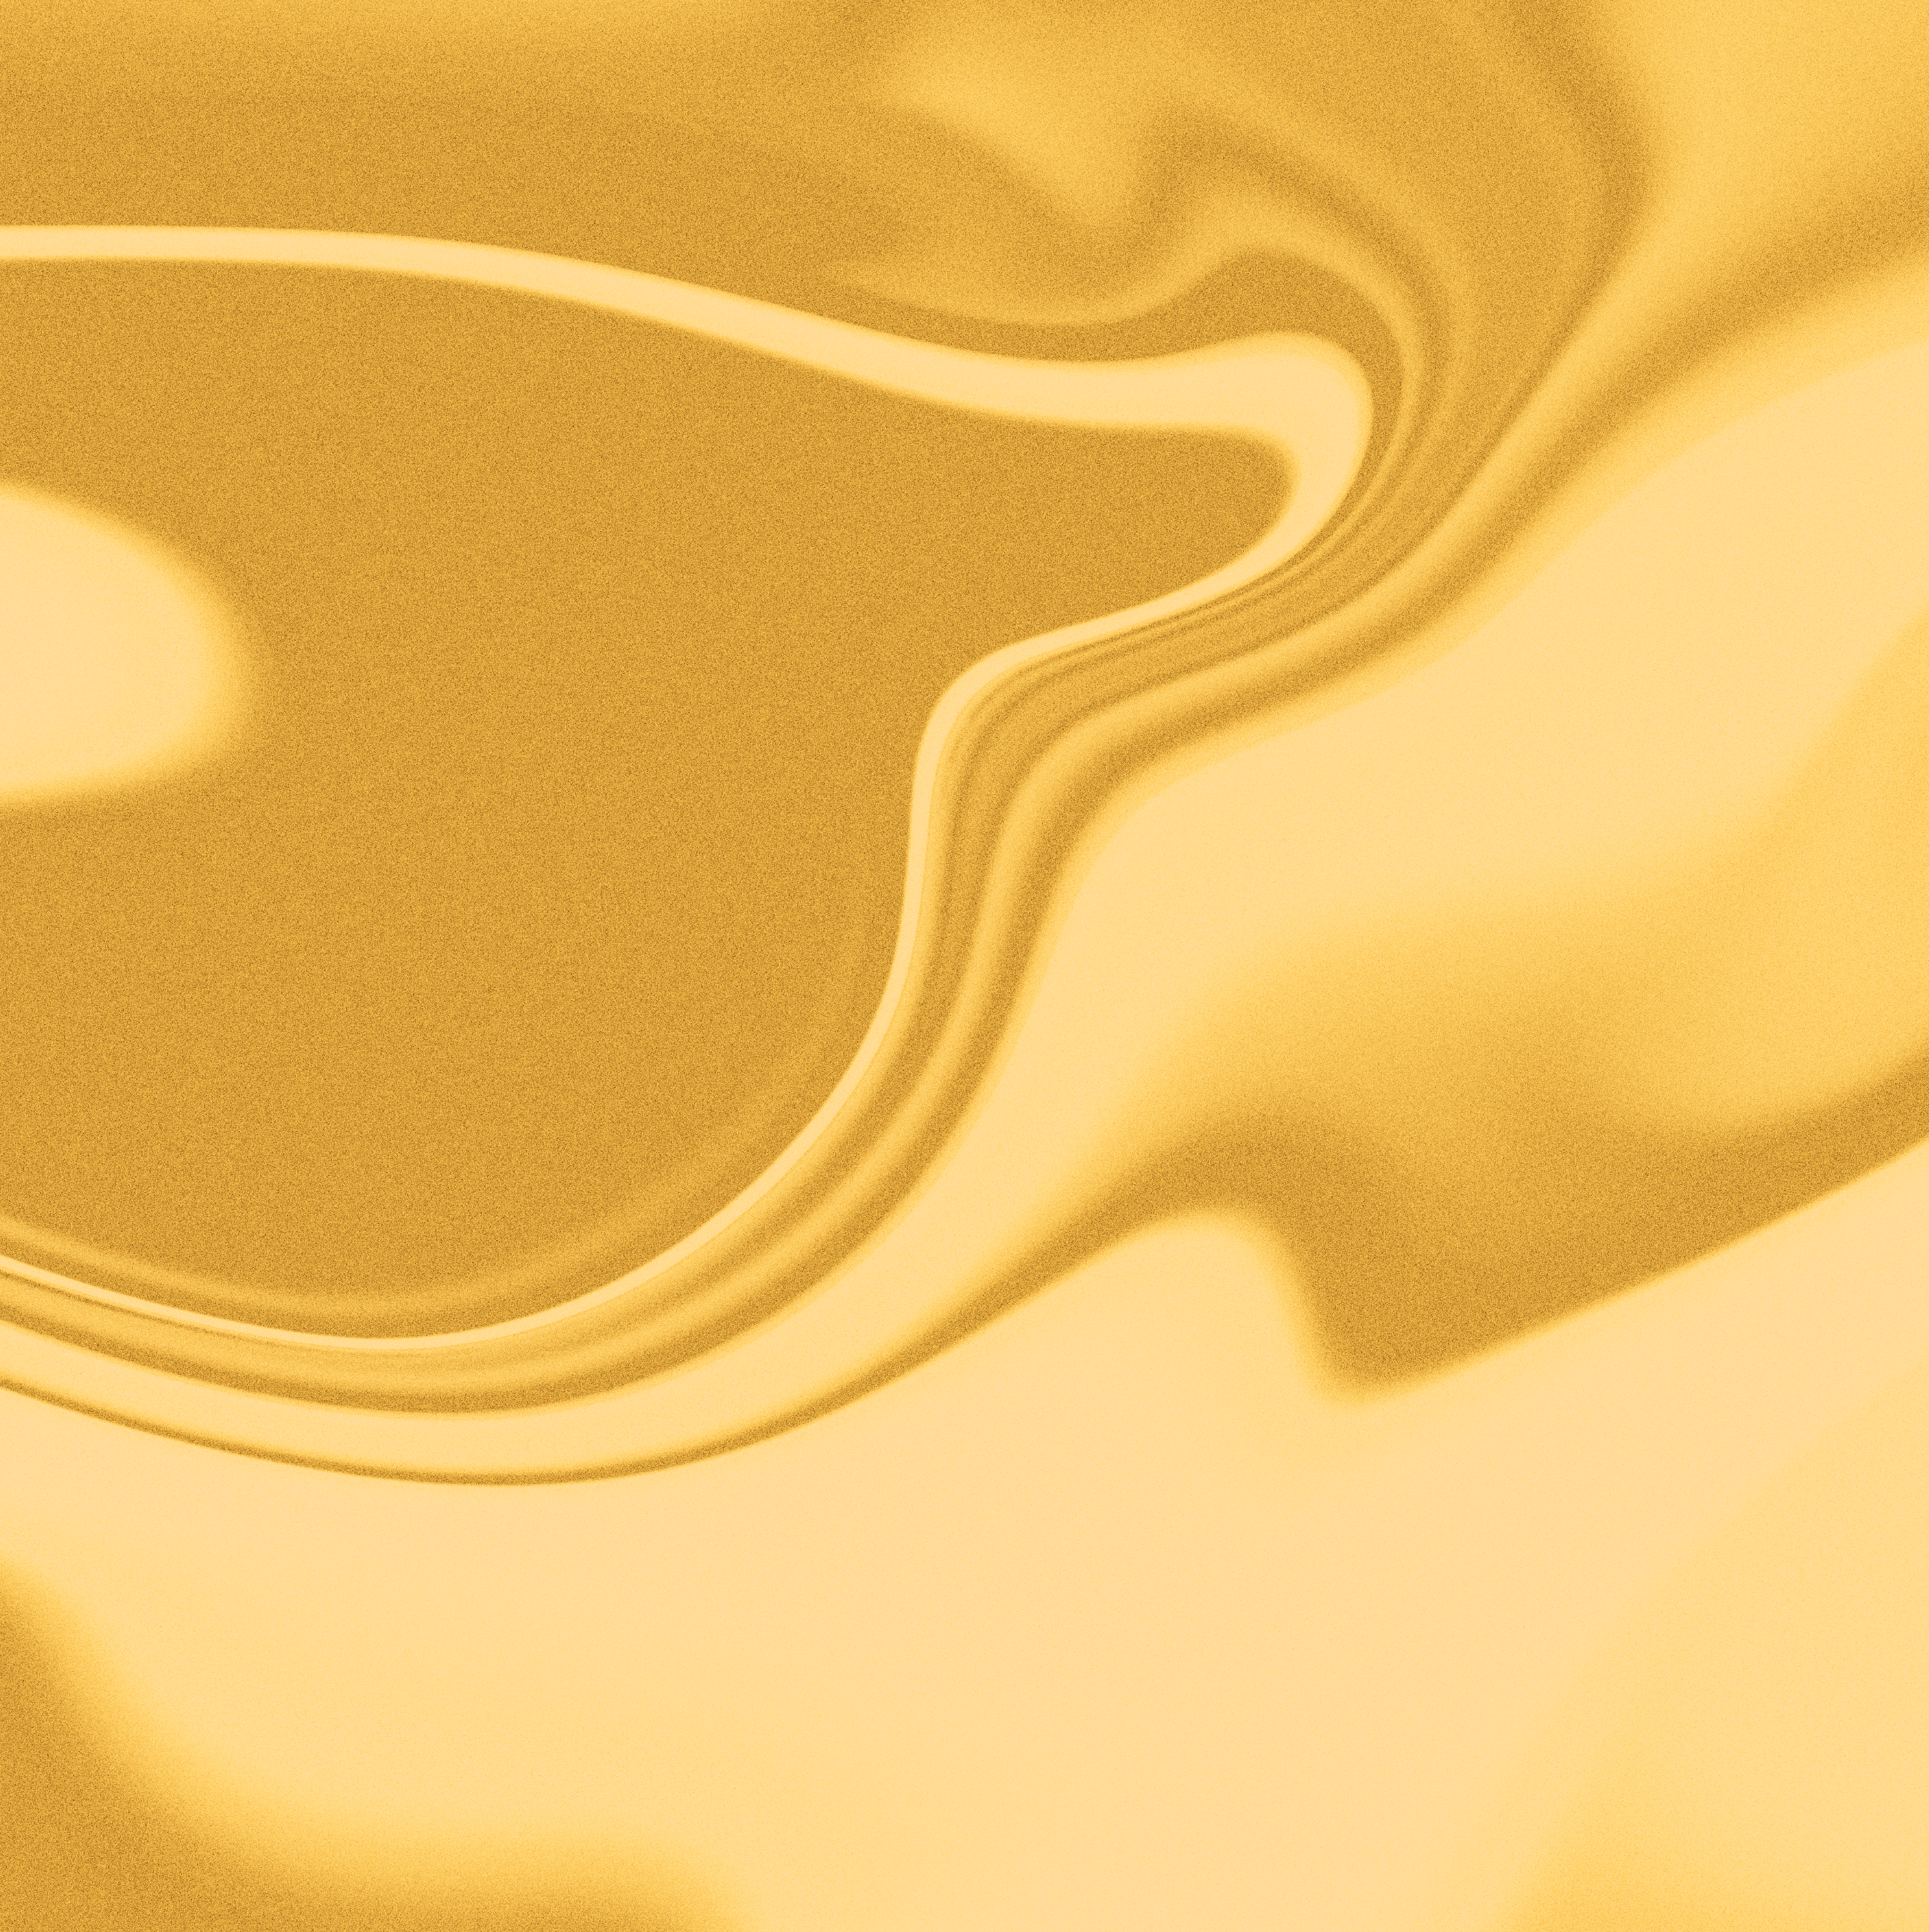 Vibrant swirl pattern in shades of gold and yellow representing the banana bread flavour for Lucid.